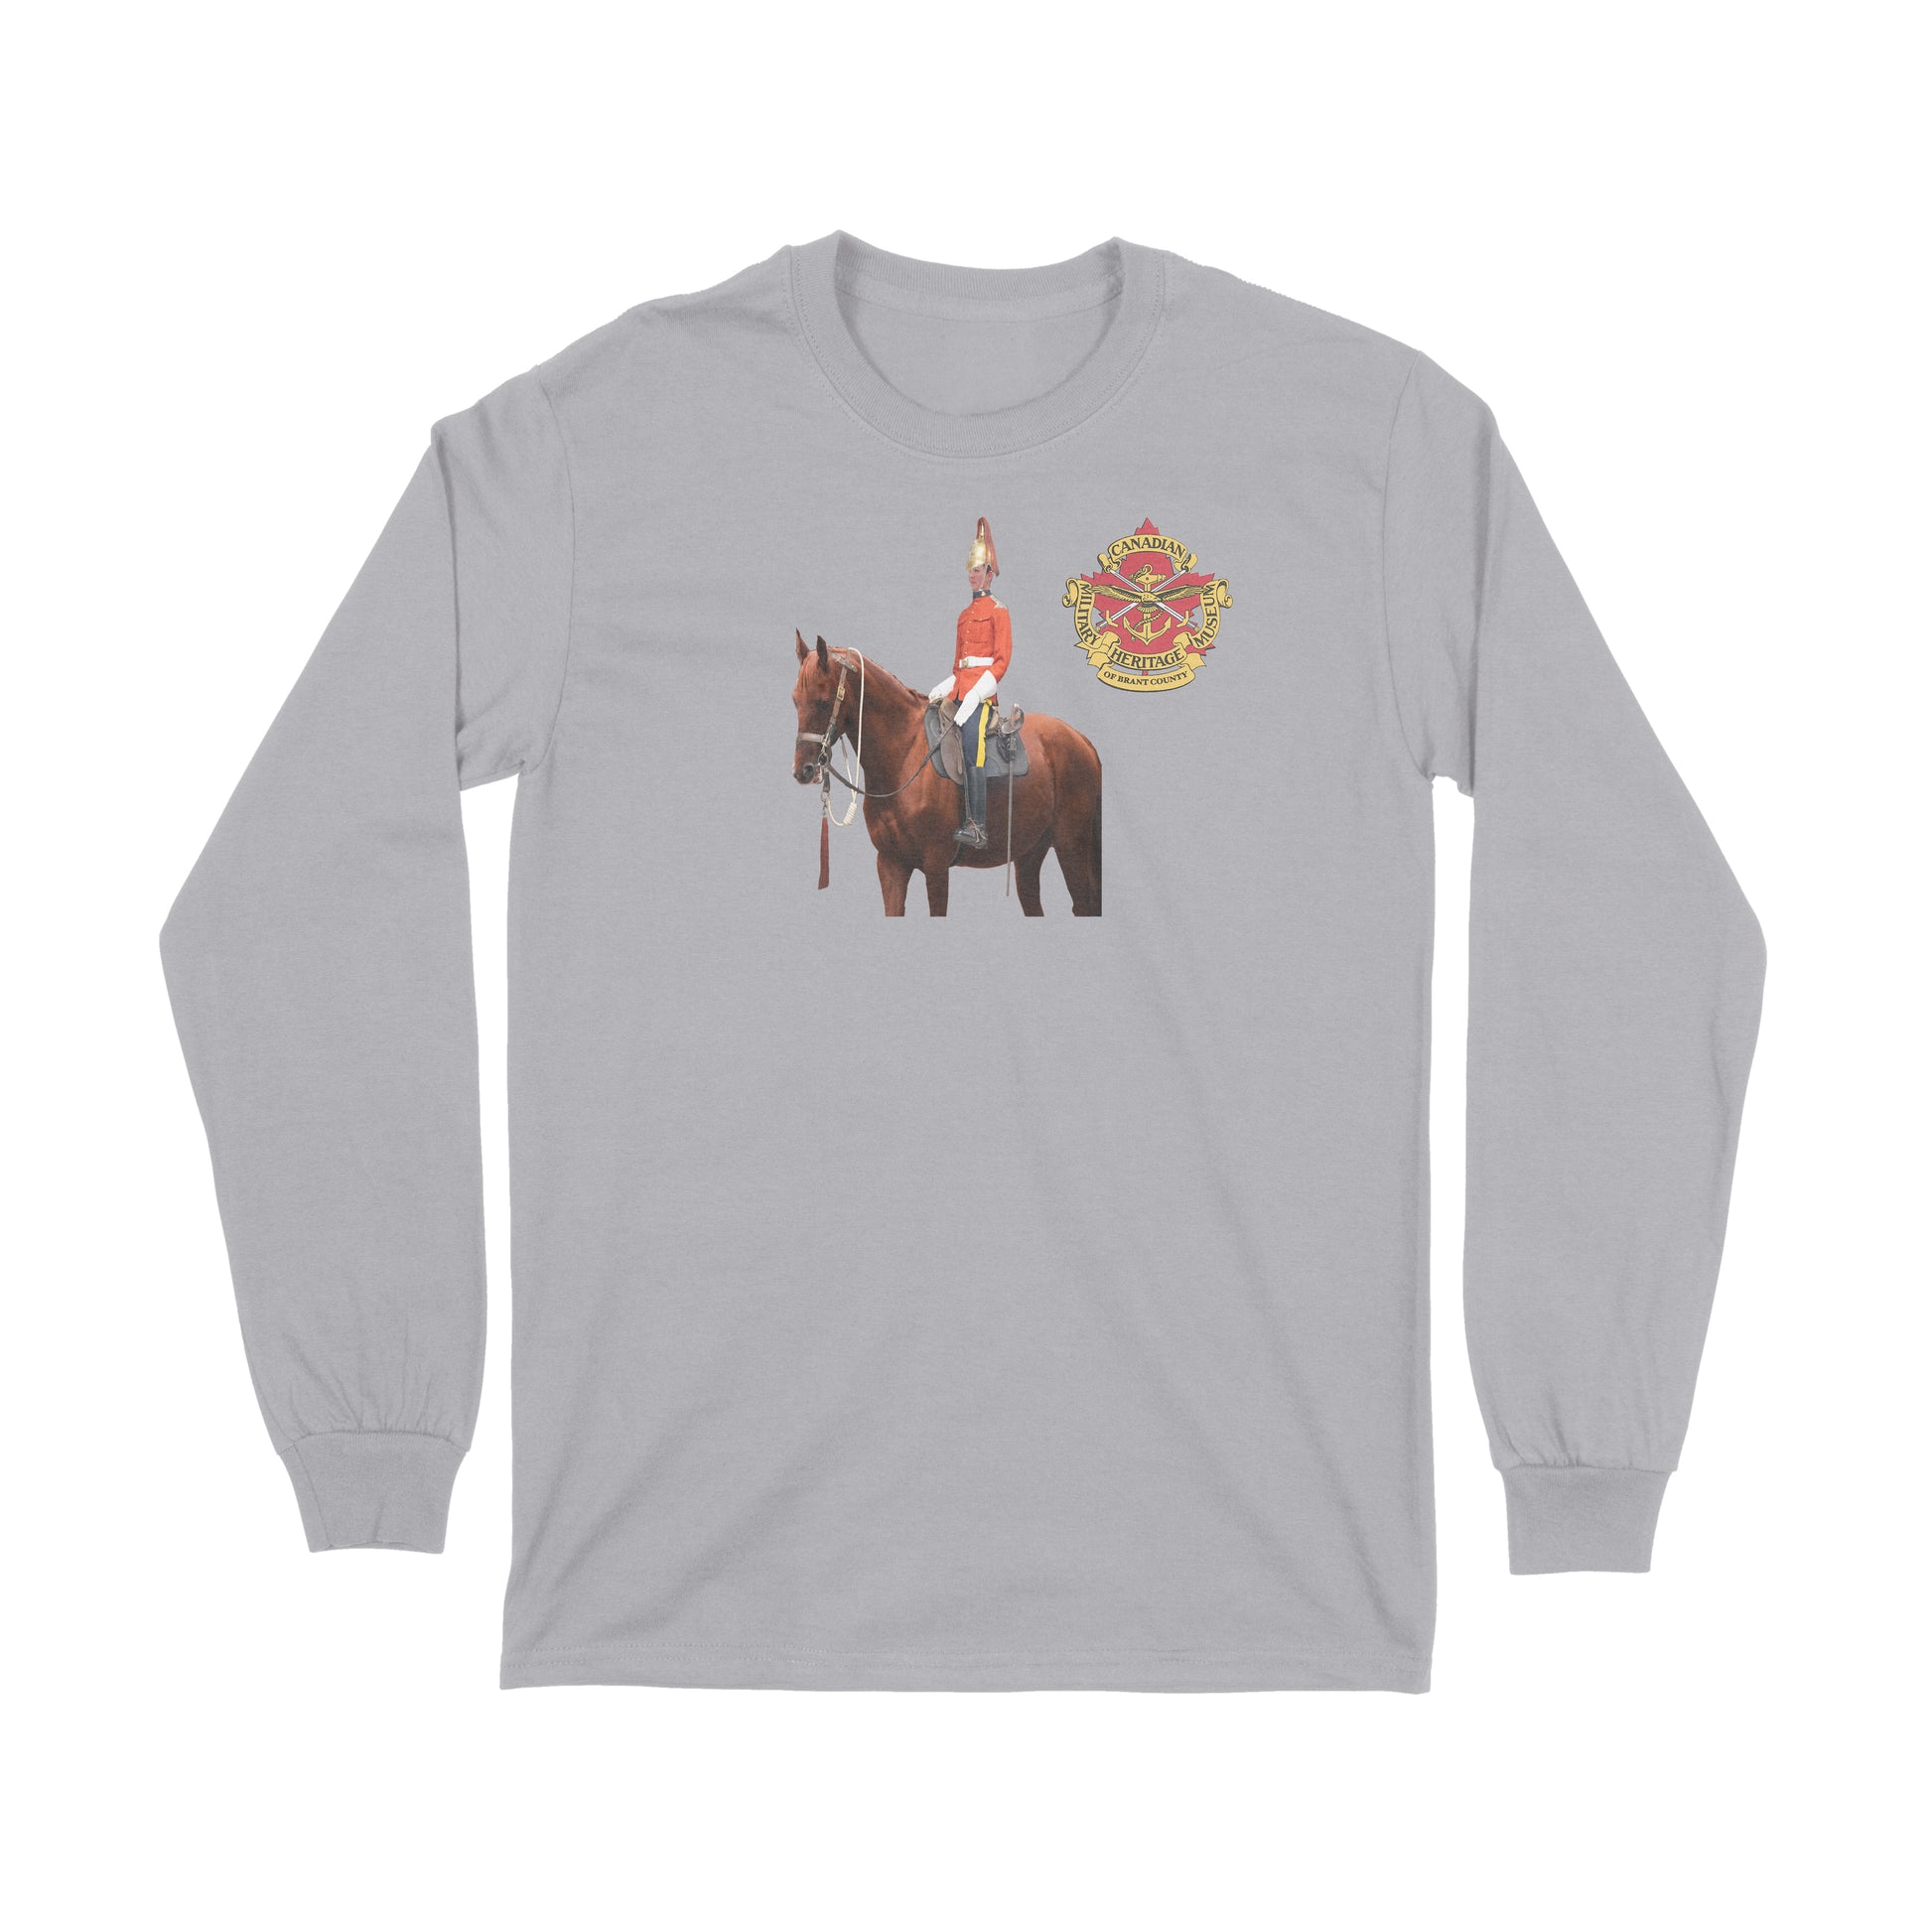 Brantford, Canadian Military Heritage Museum, Fat Dave, Long Sleeve, Mounted Dragoon, Museum, Grey